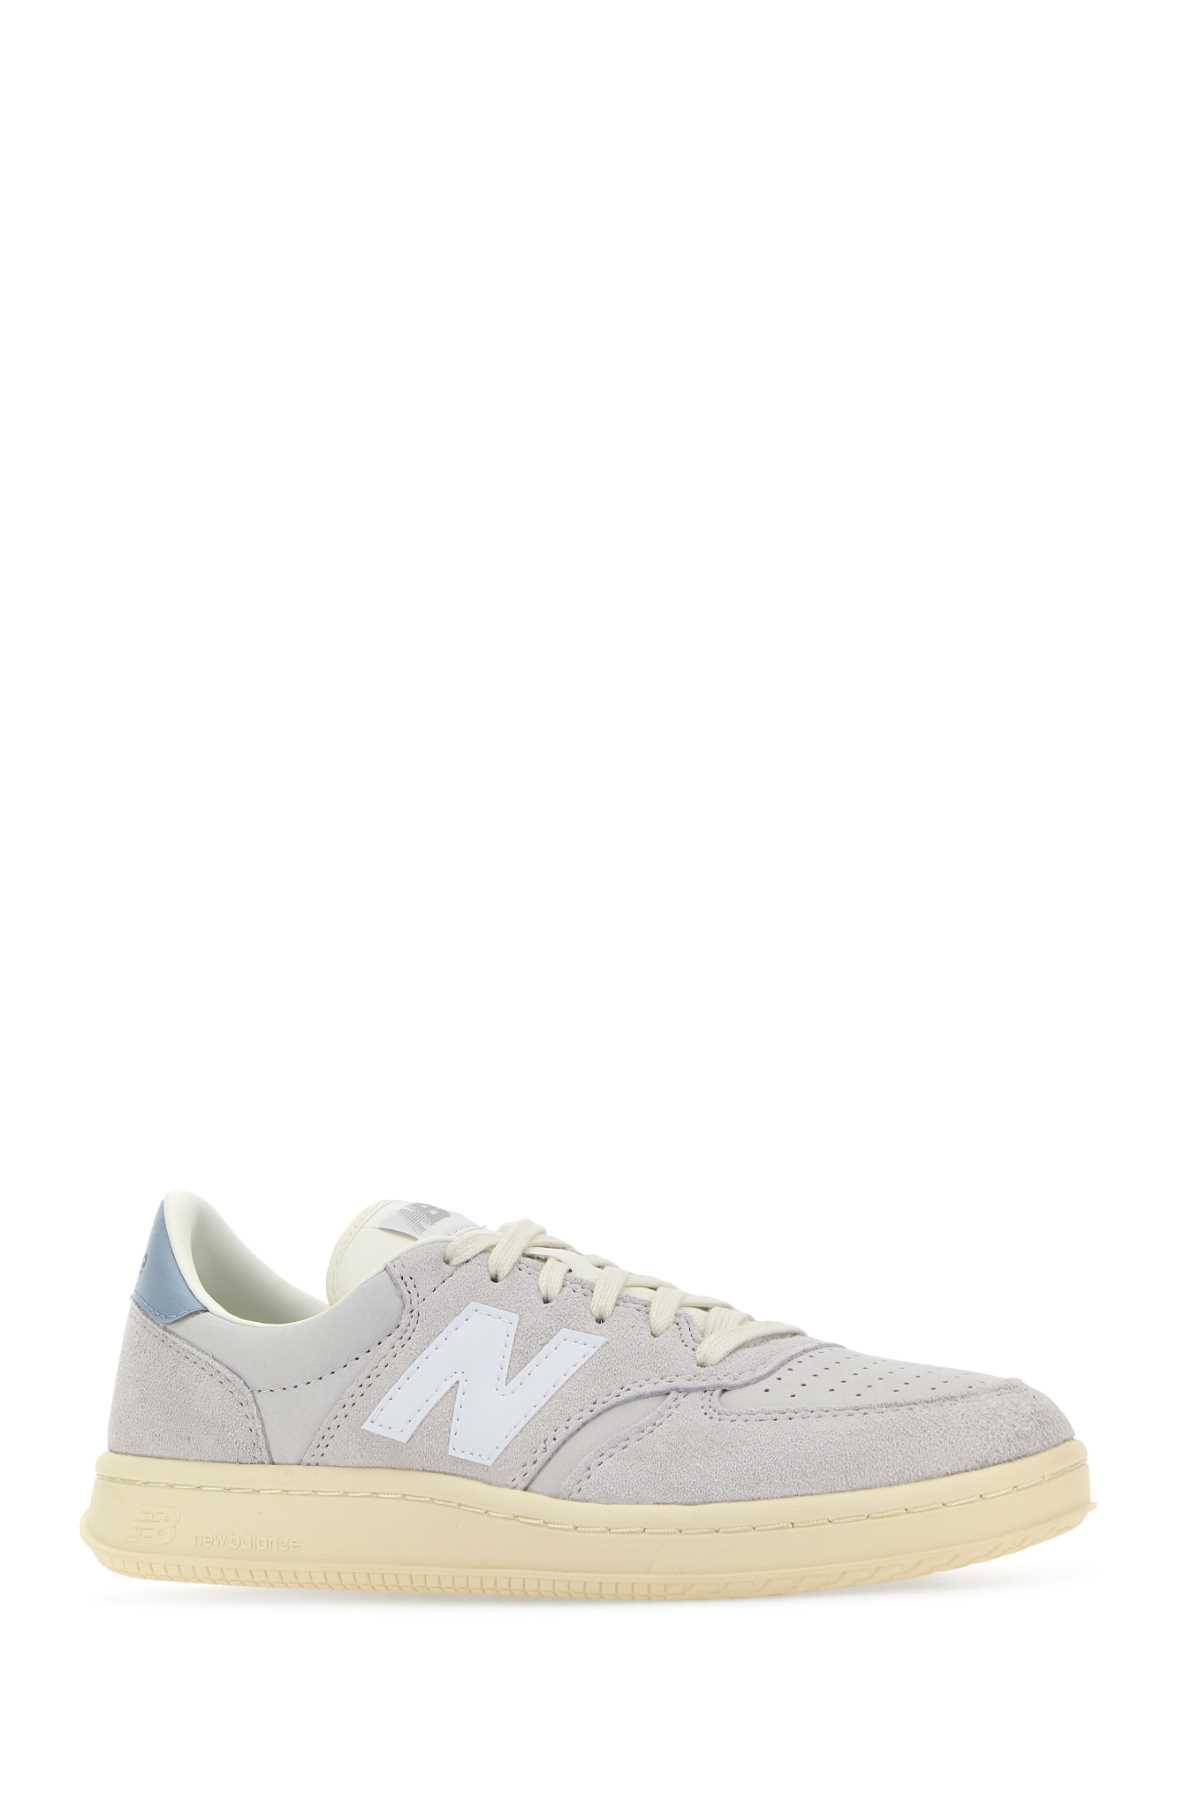 Shop New Balance Light Grey Suede T500 Sneakers In Offwhite